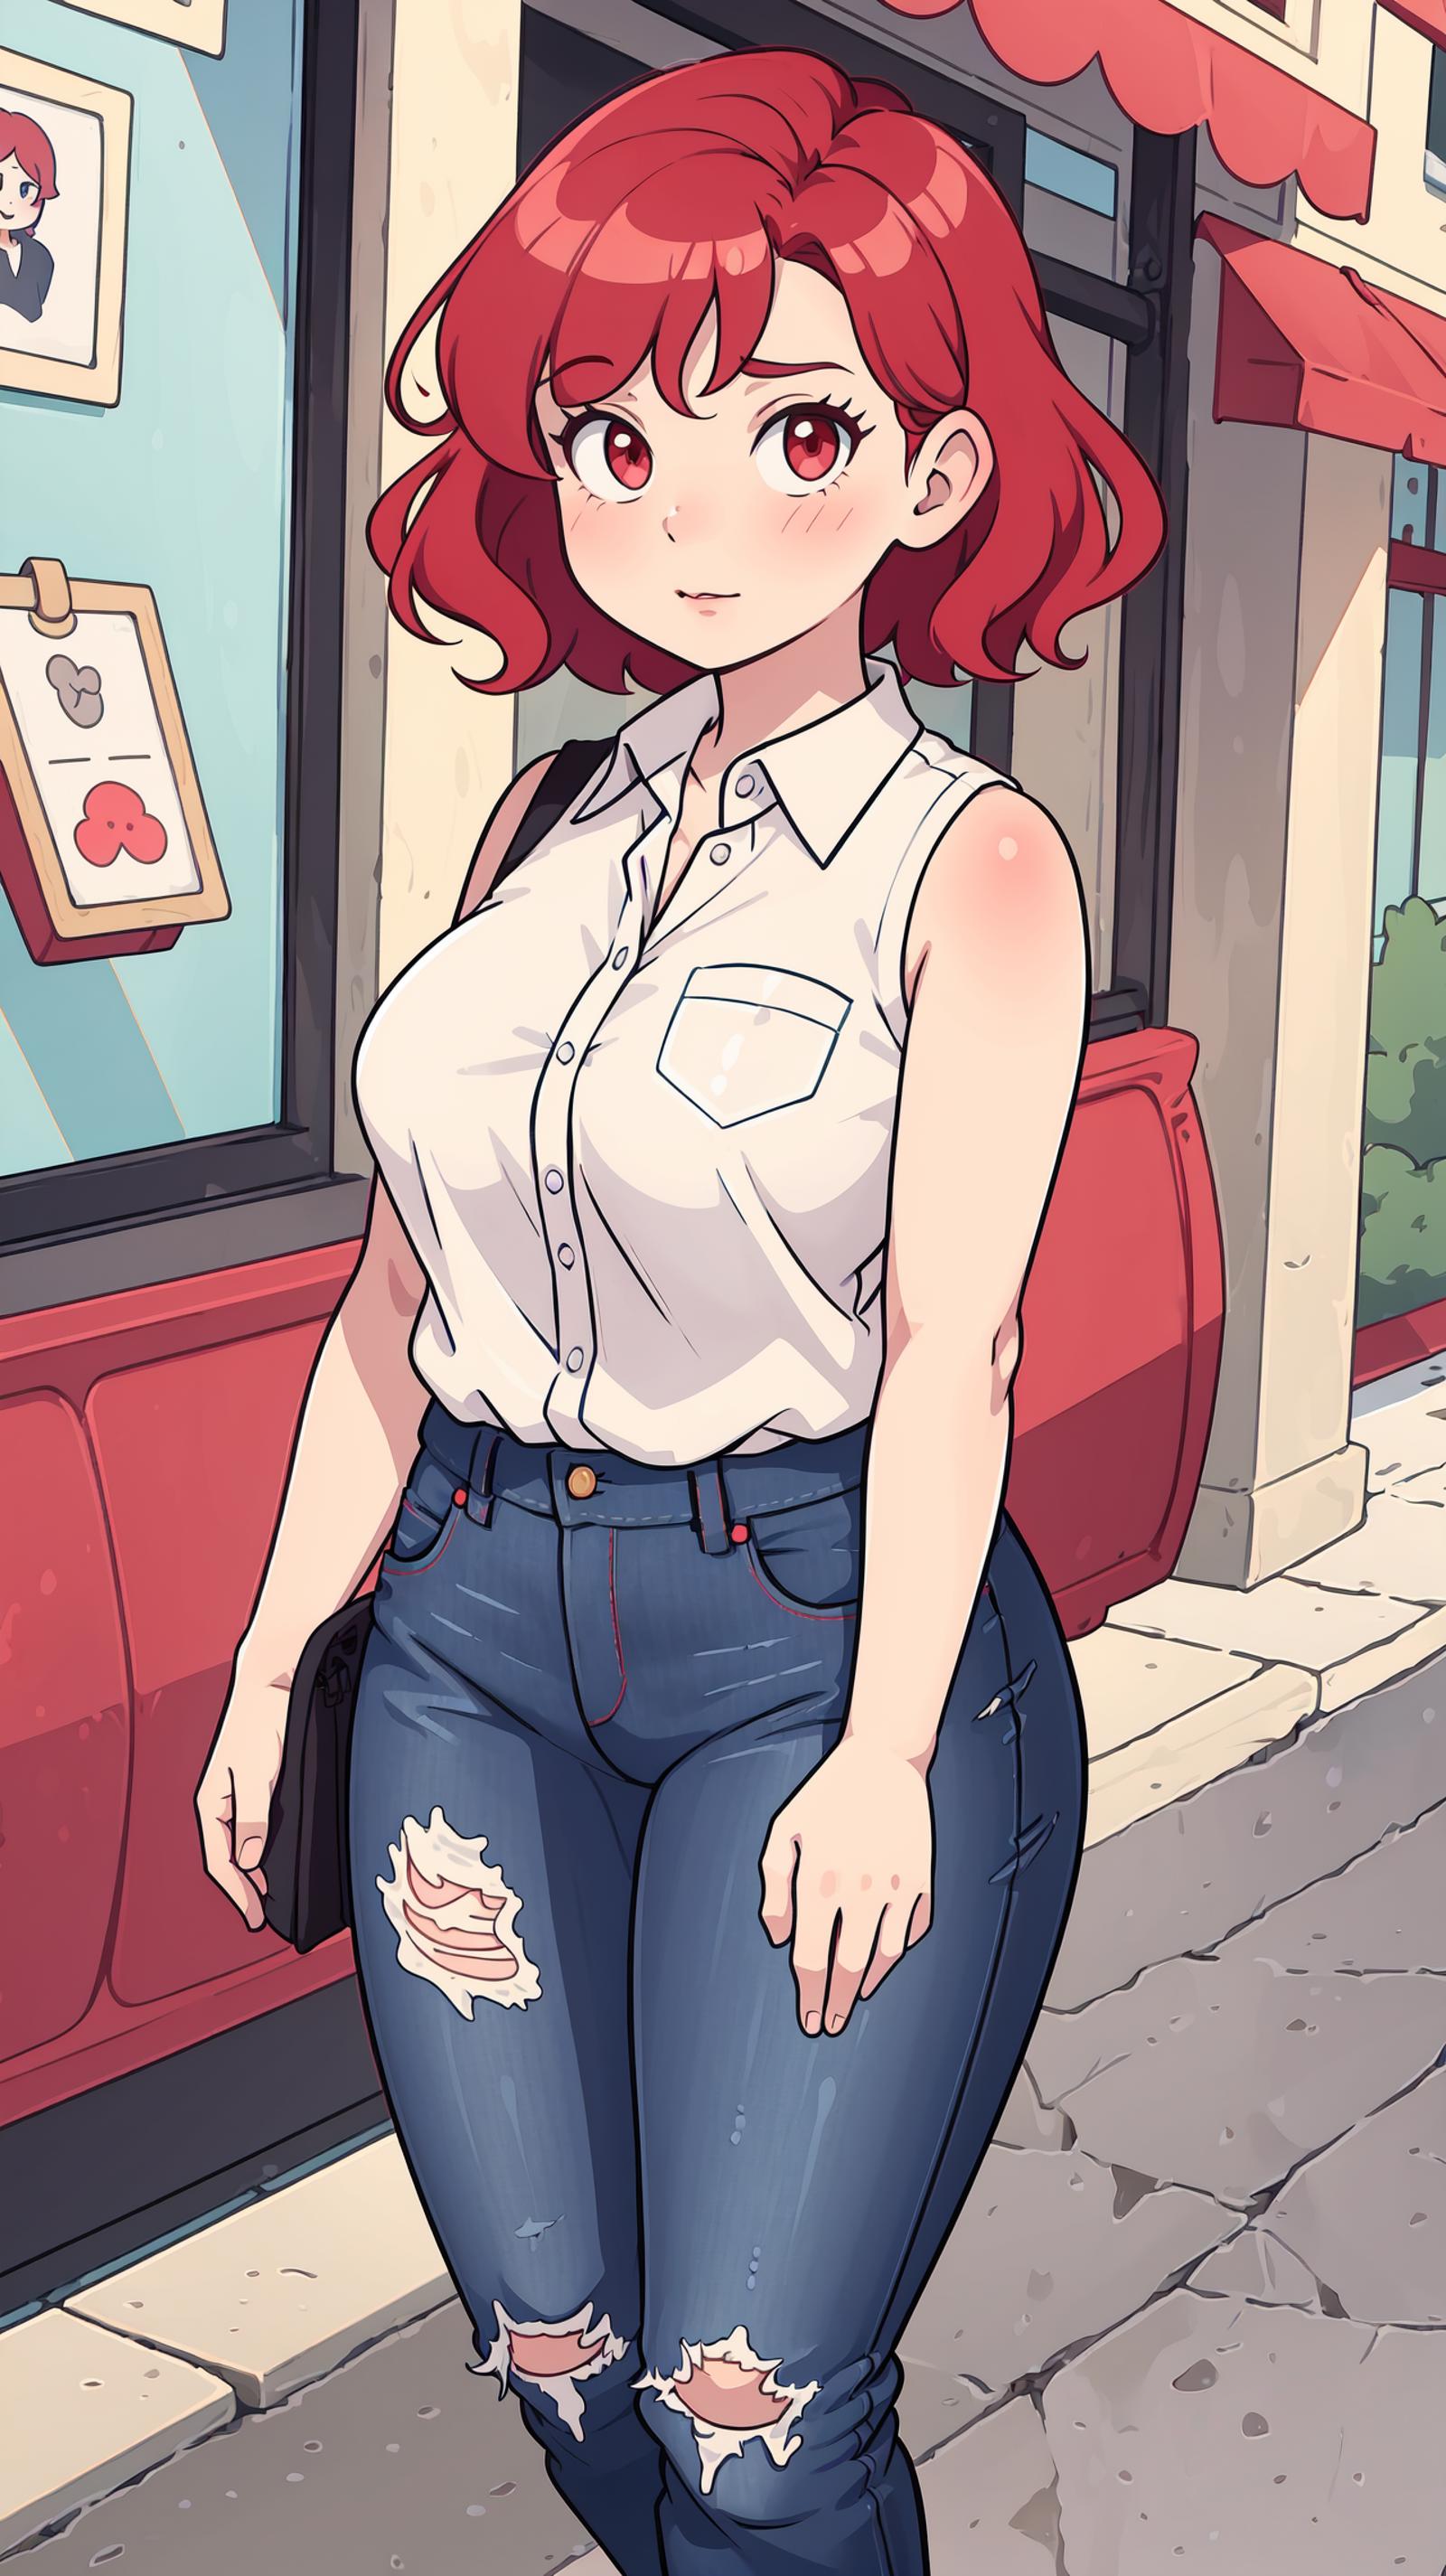 A cartoon woman wearing a white shirt and blue jeans.